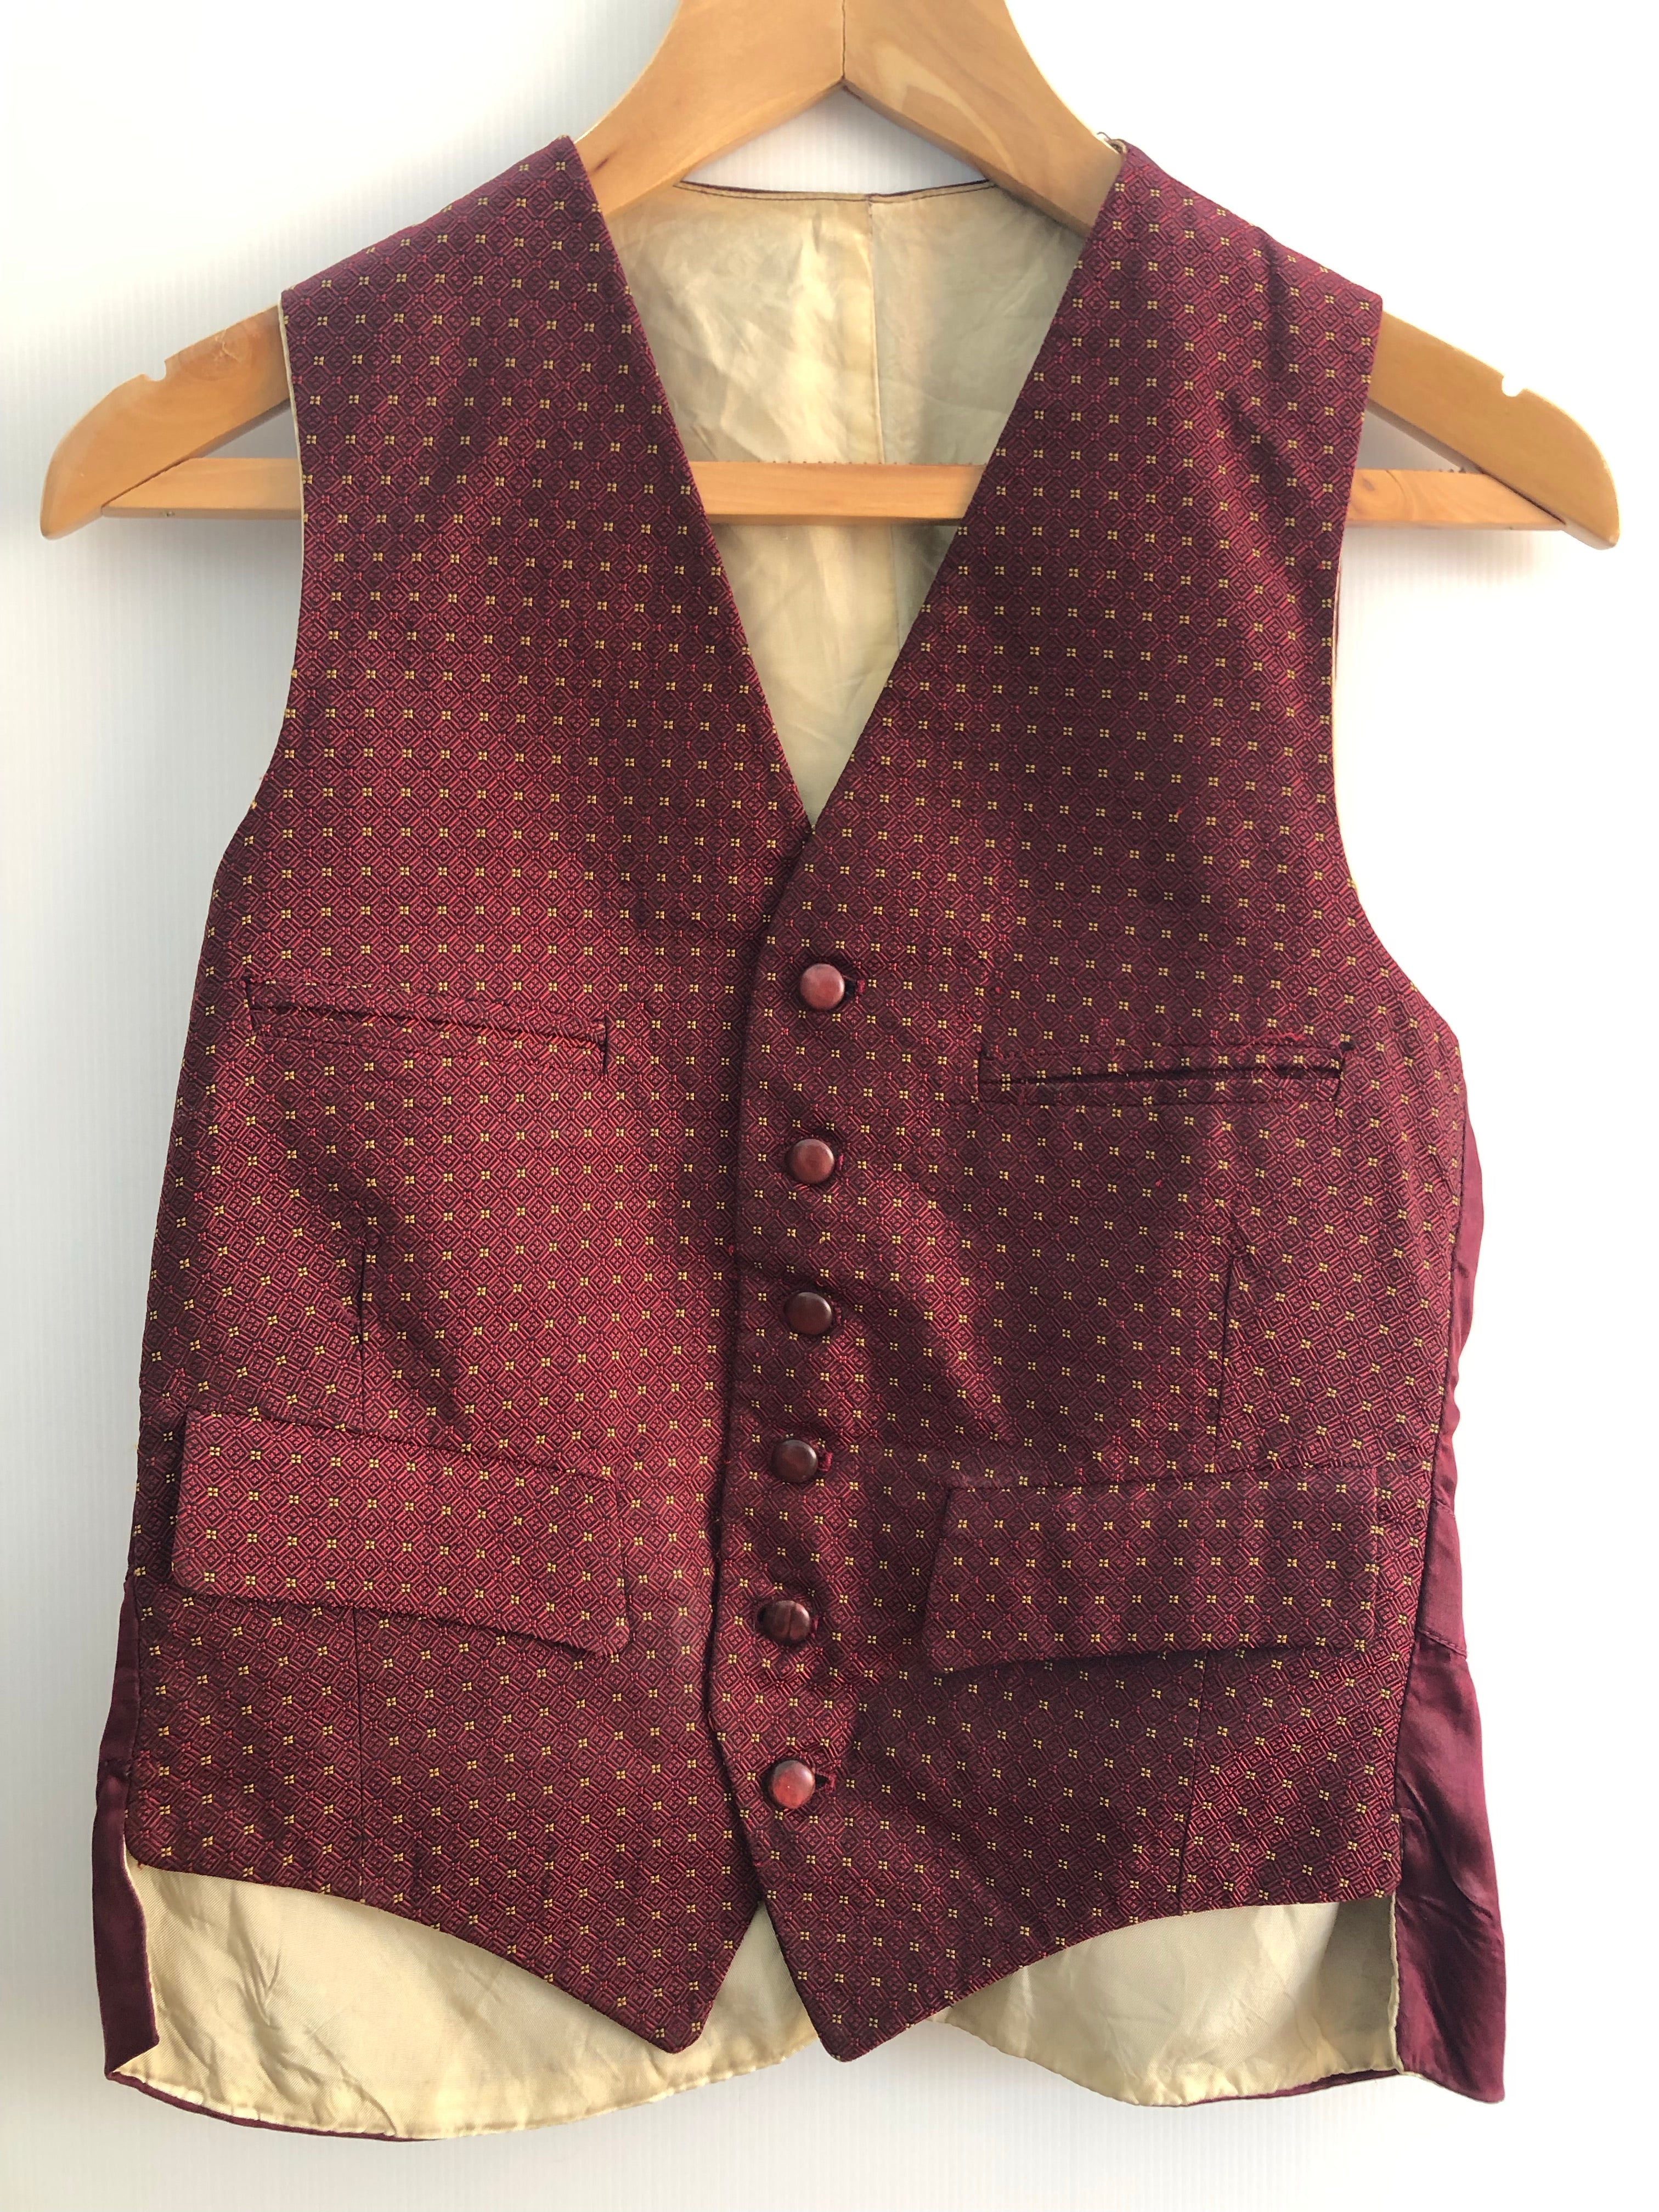 1960s Patterned Waistcoat in Burgundy - Size S